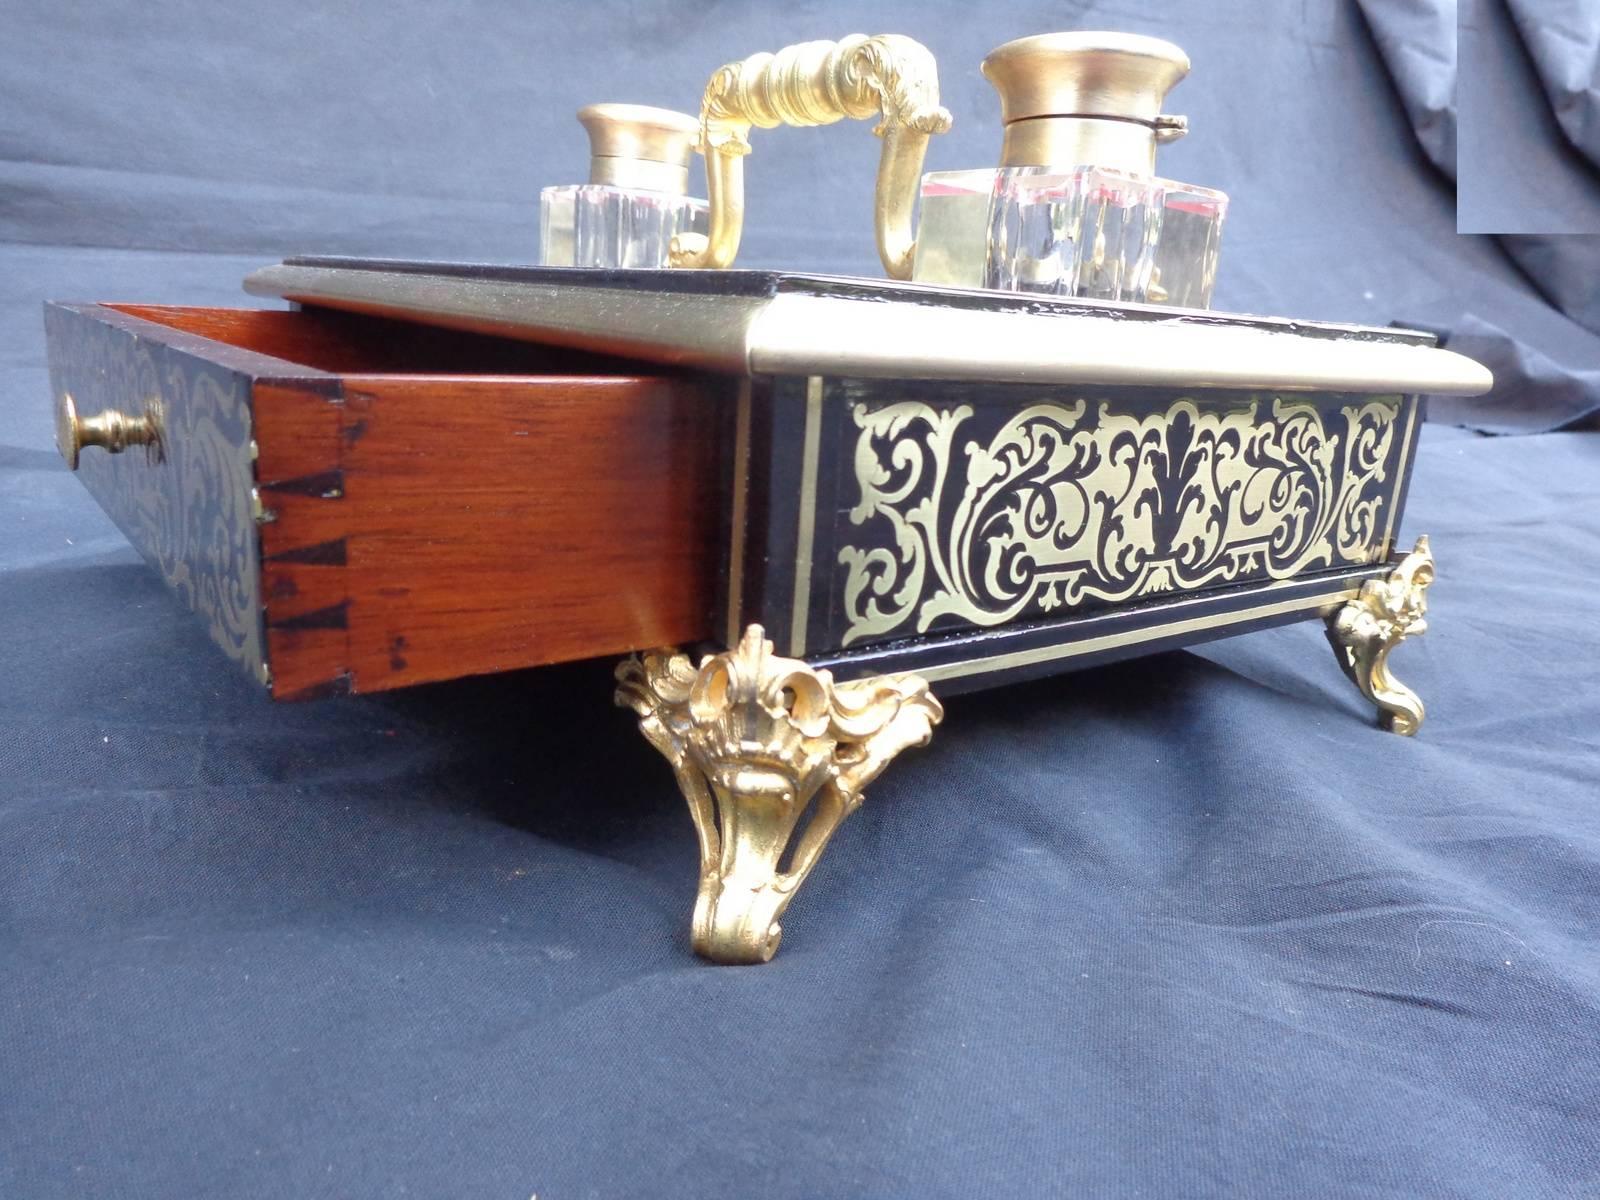 Inkwell brass marquetry on ebony
with crystal inkwell.
Period Napoleon III.
Perfect condition.

Inkwell opening on a drawer,
with an important center handle and foot gilded bronze.
Beautiful marquetry work with foliage on all sides.
 
Small